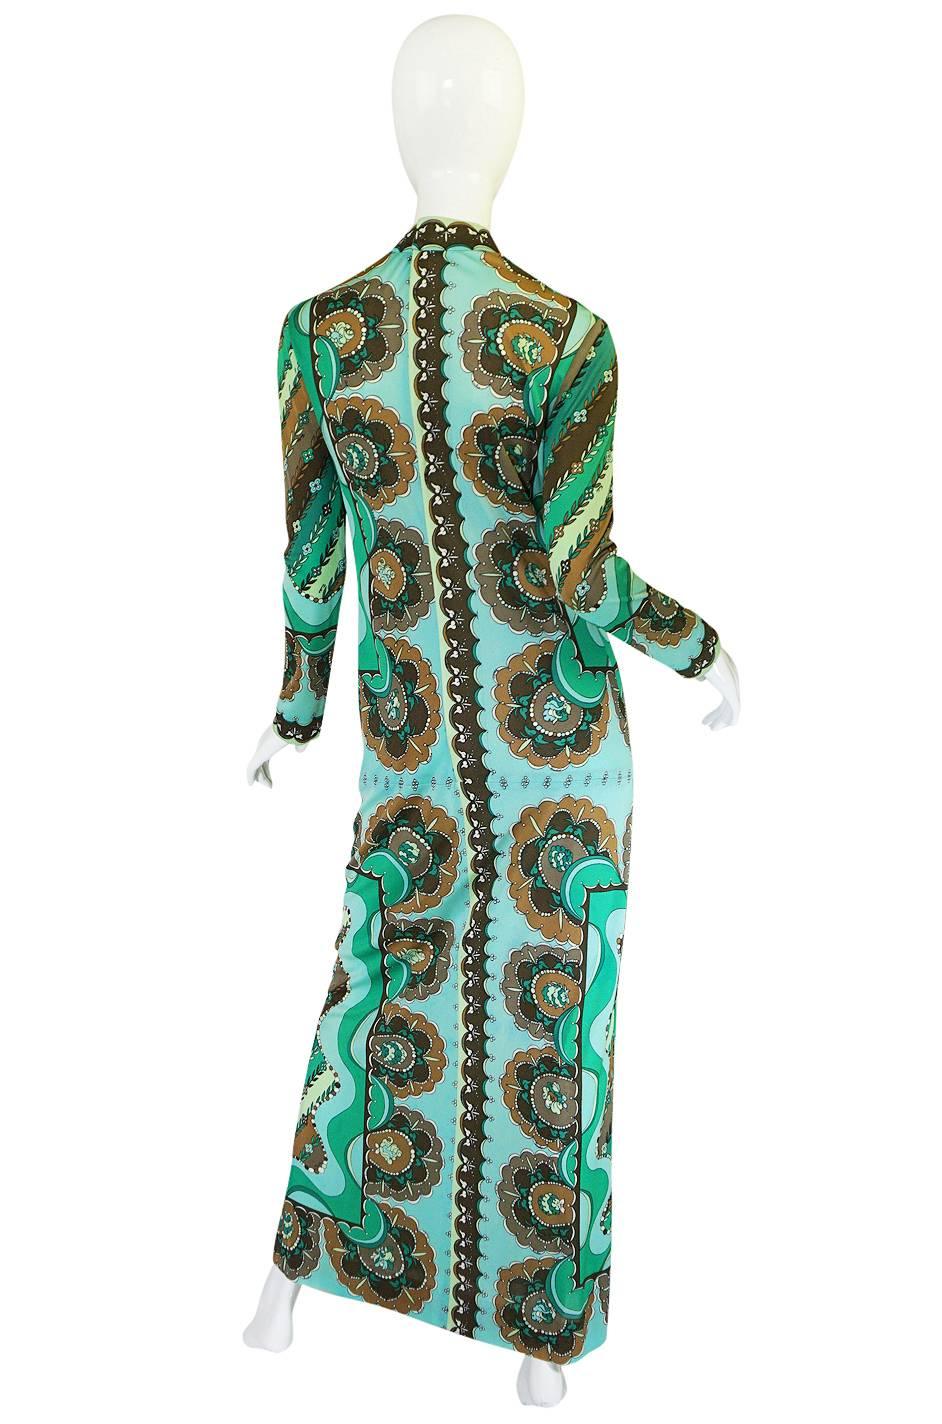 

This is absolutely gorgeous Pucci dress with a superb color palette in shade of green mixed with taupes to create one of his signature prints. It is made of a lightweight silk jersey, a preferred fabric choice for Pucci because of how it draped